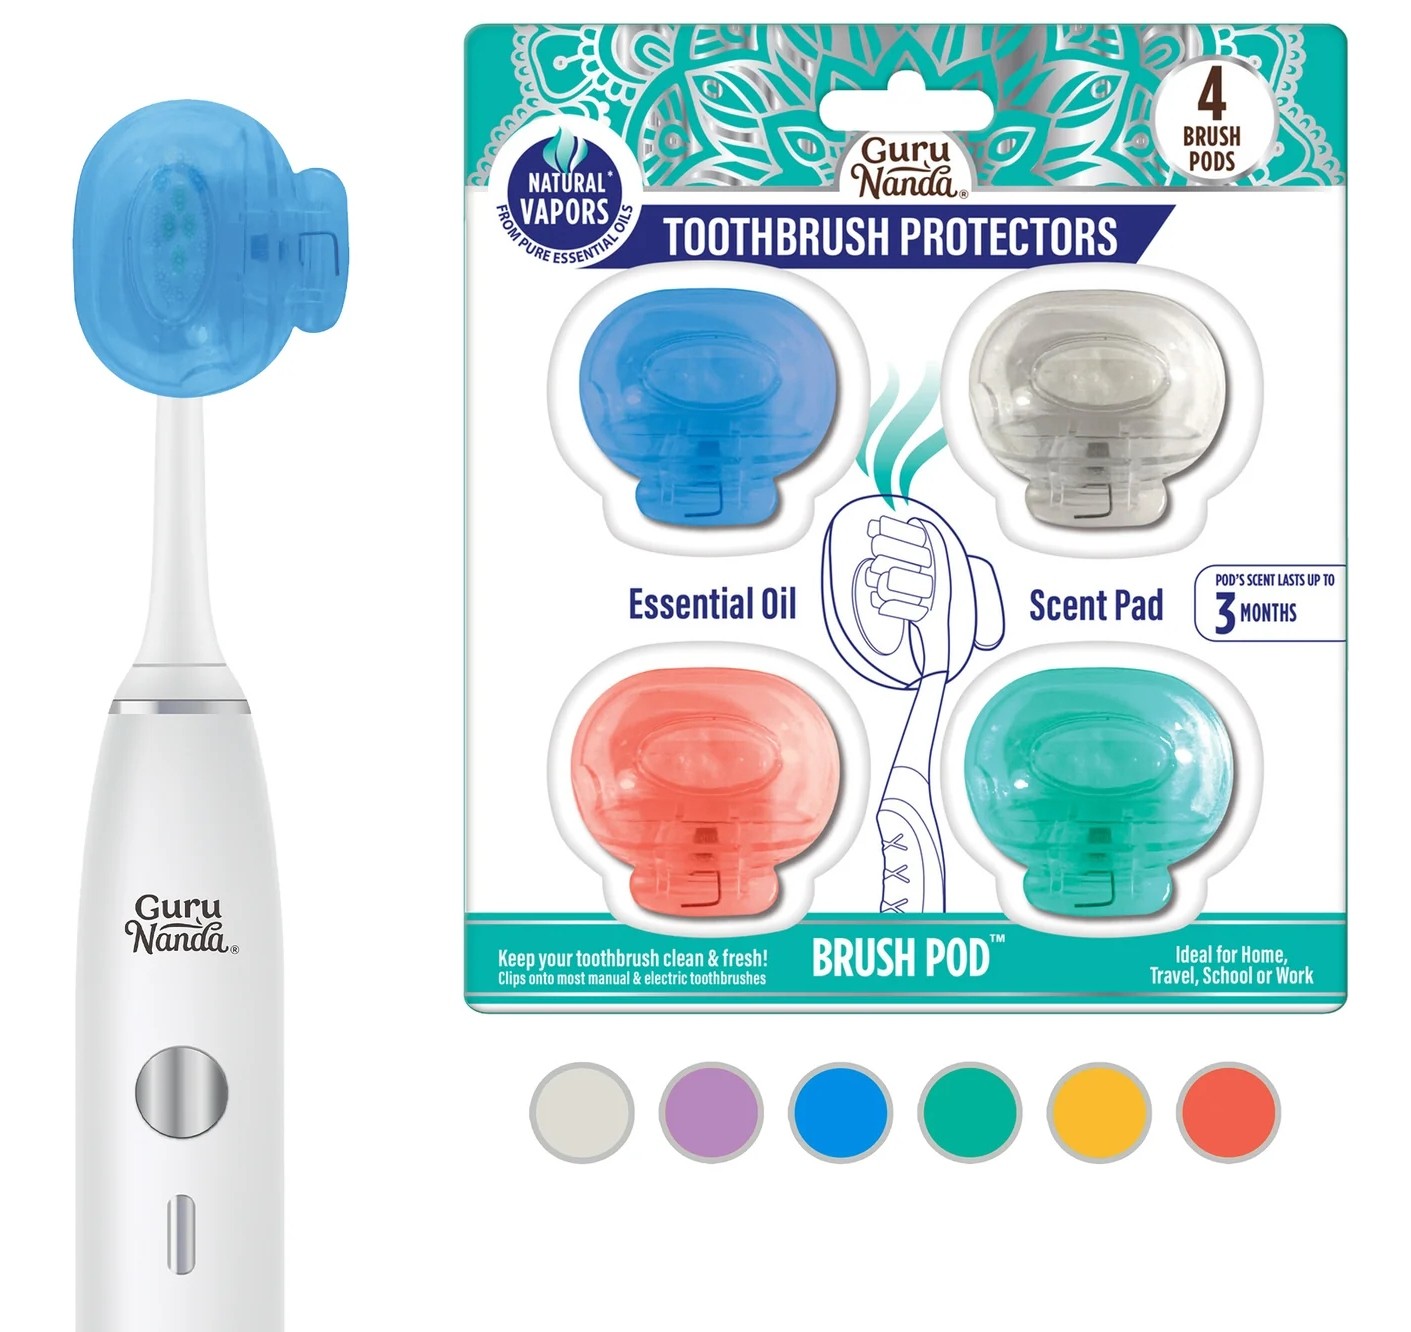 GuruNanda Brush Pods Keeps your Toothbrush Healthy and Clean